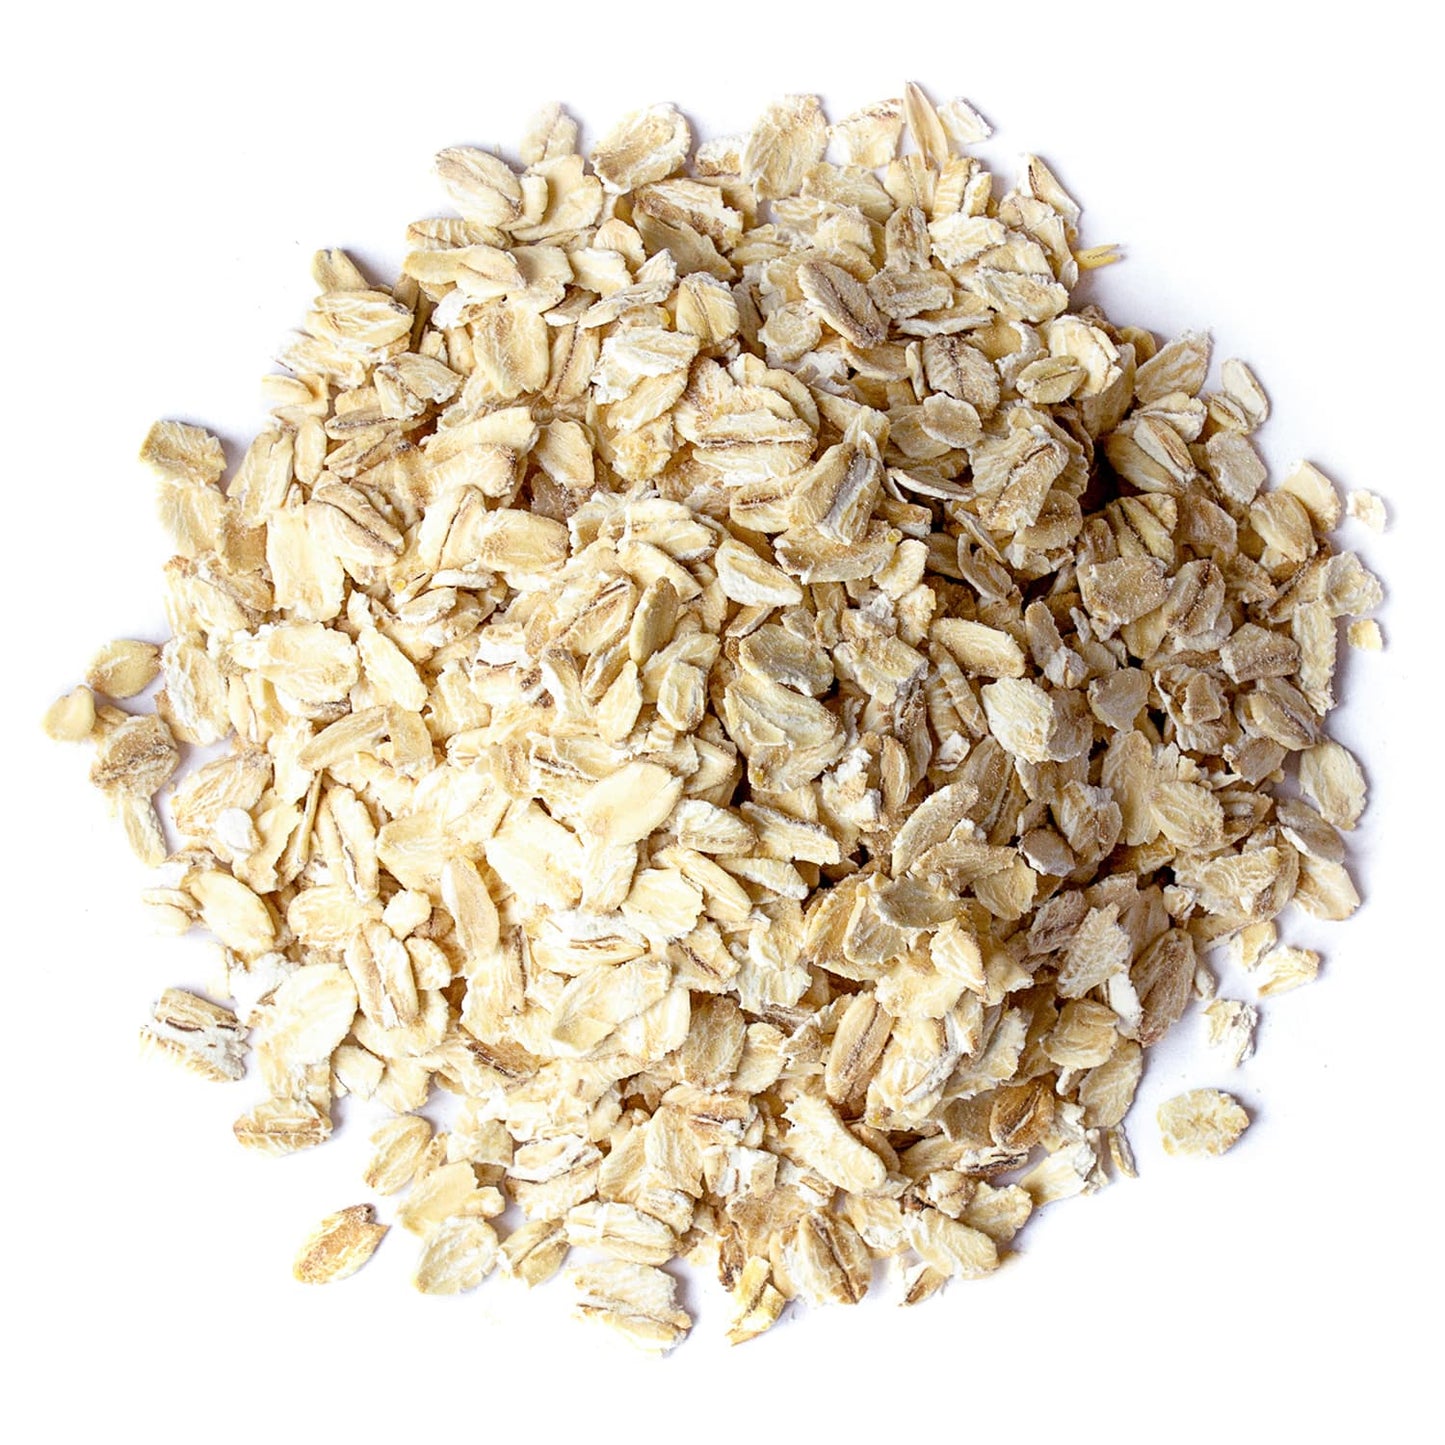 Organic Rolled Oats - Old-Fashioned, 100% Whole Grain, Non-GMO, Kosher, Bulk, Product of the USA - by Food to Live